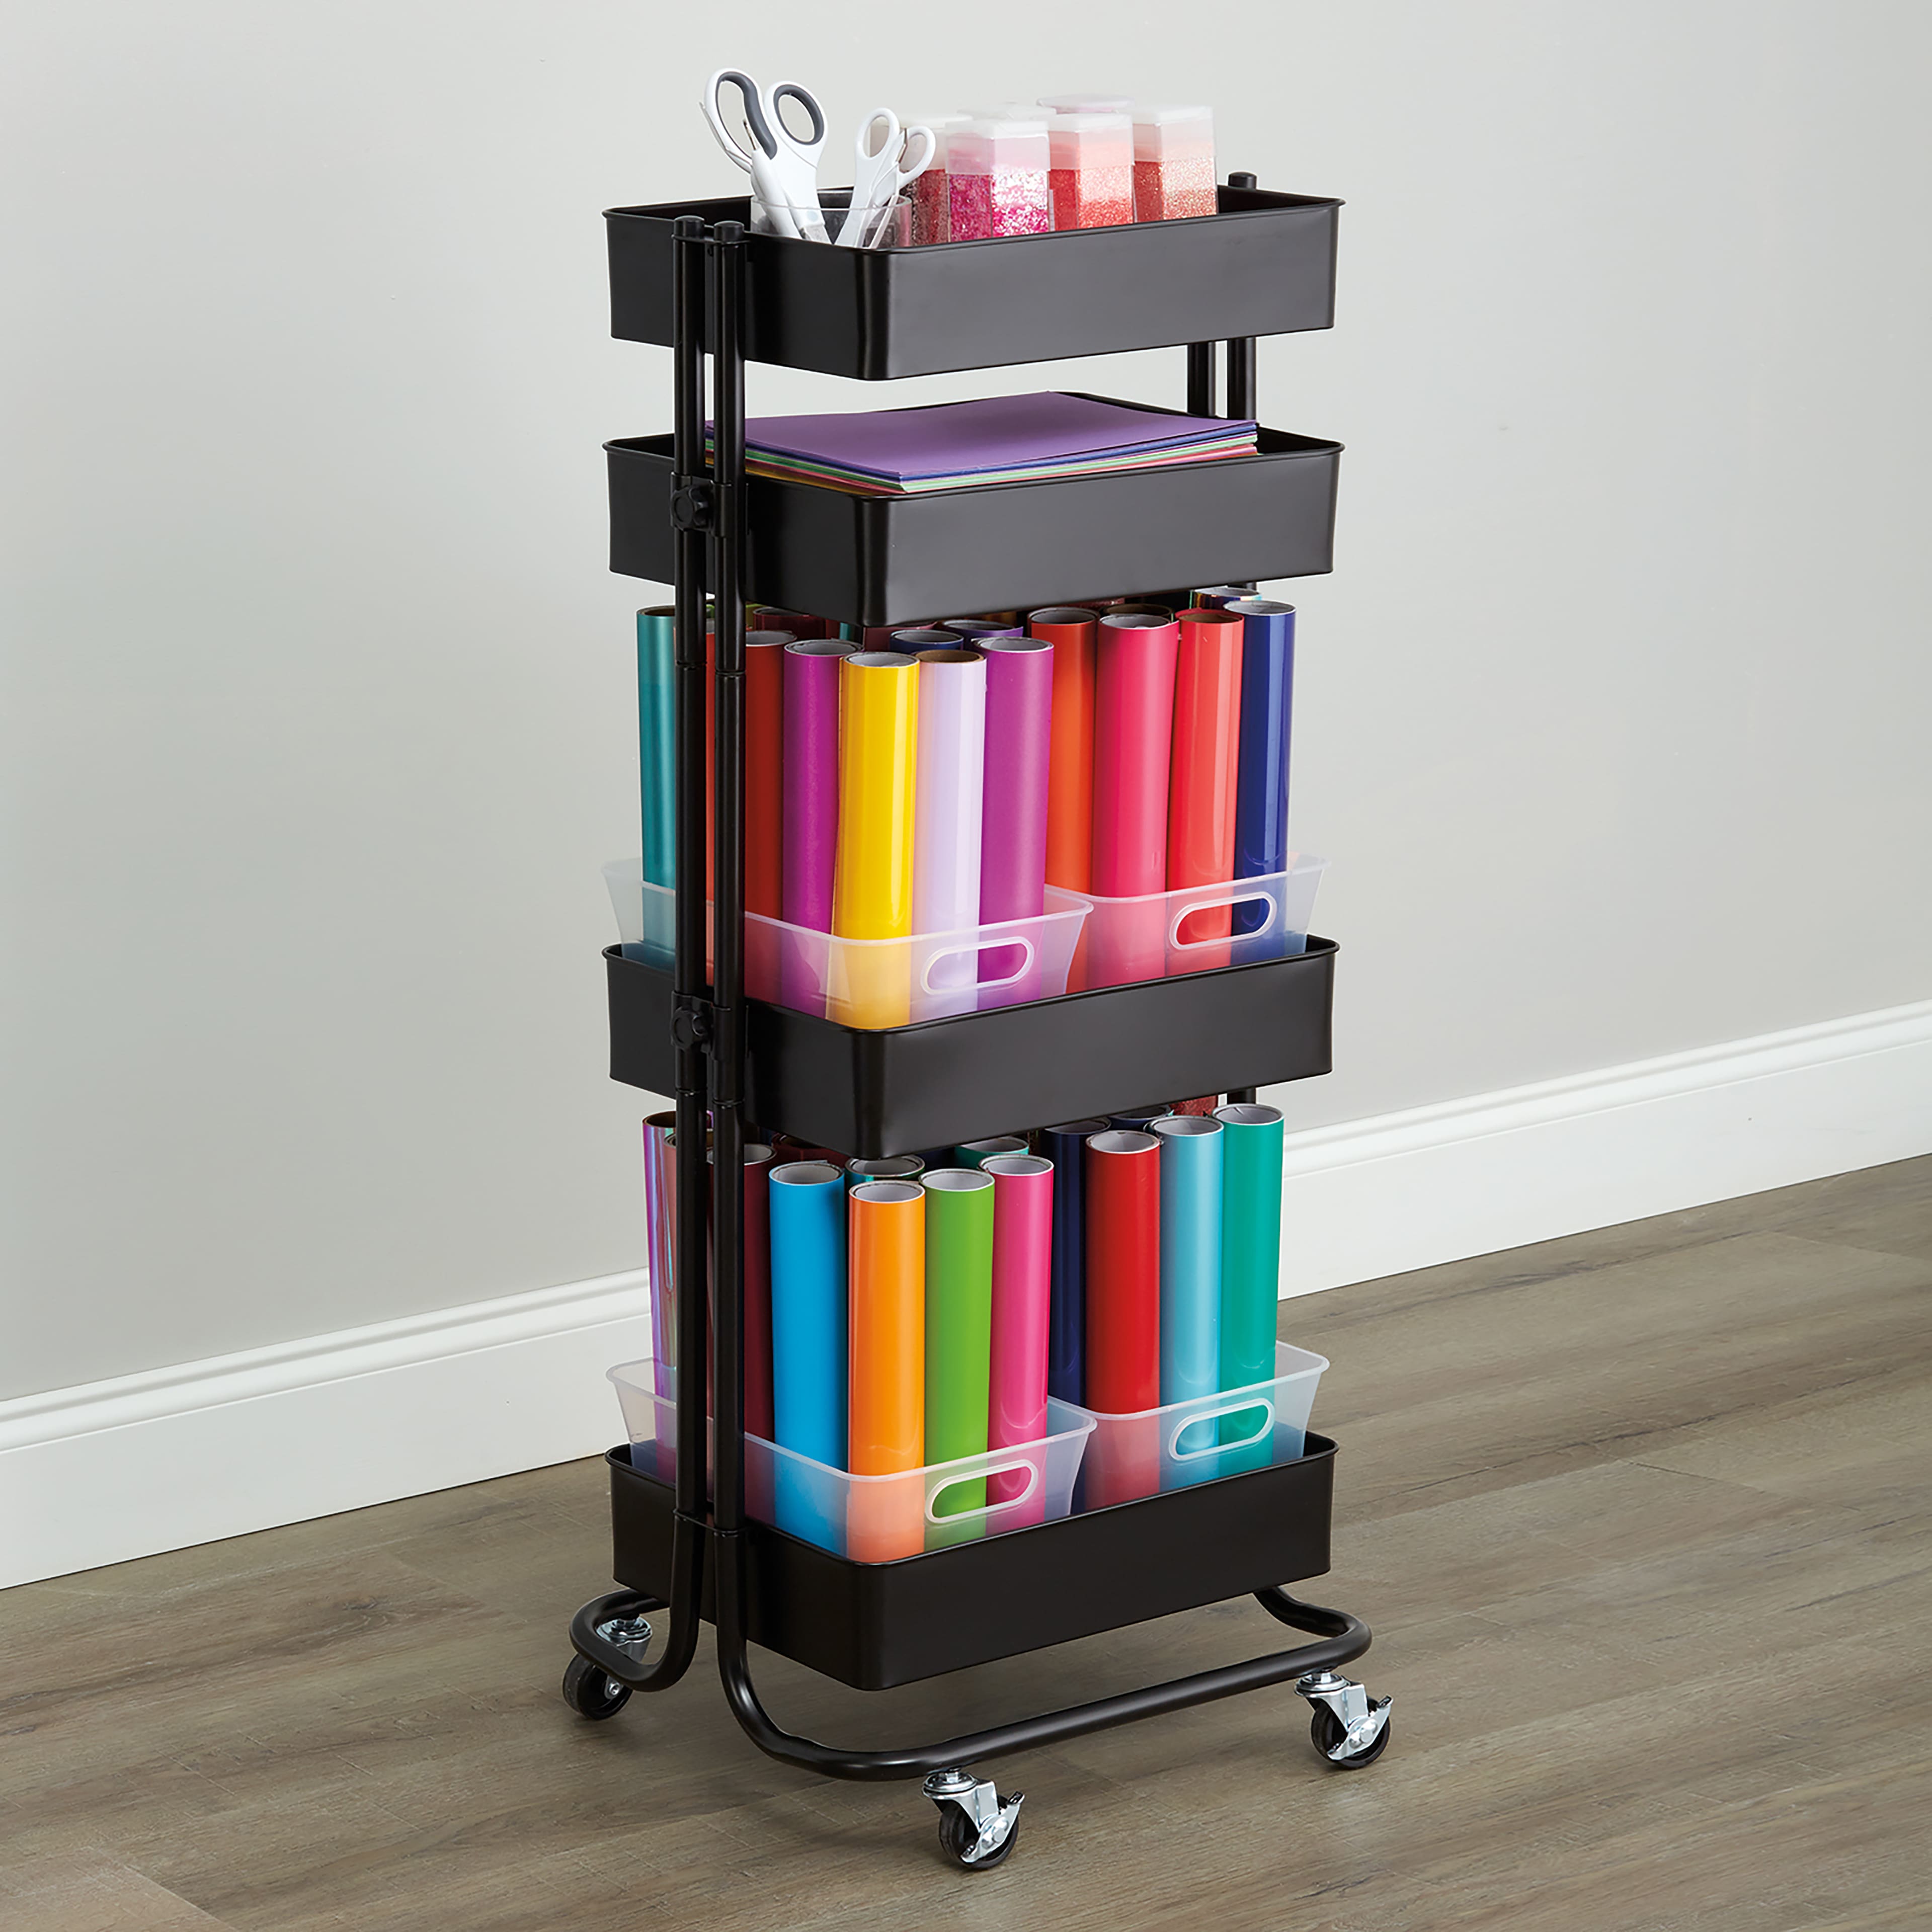 Michaels Stores Lexington 3-Tier Rolling Cart by Simply Tidy 29.99